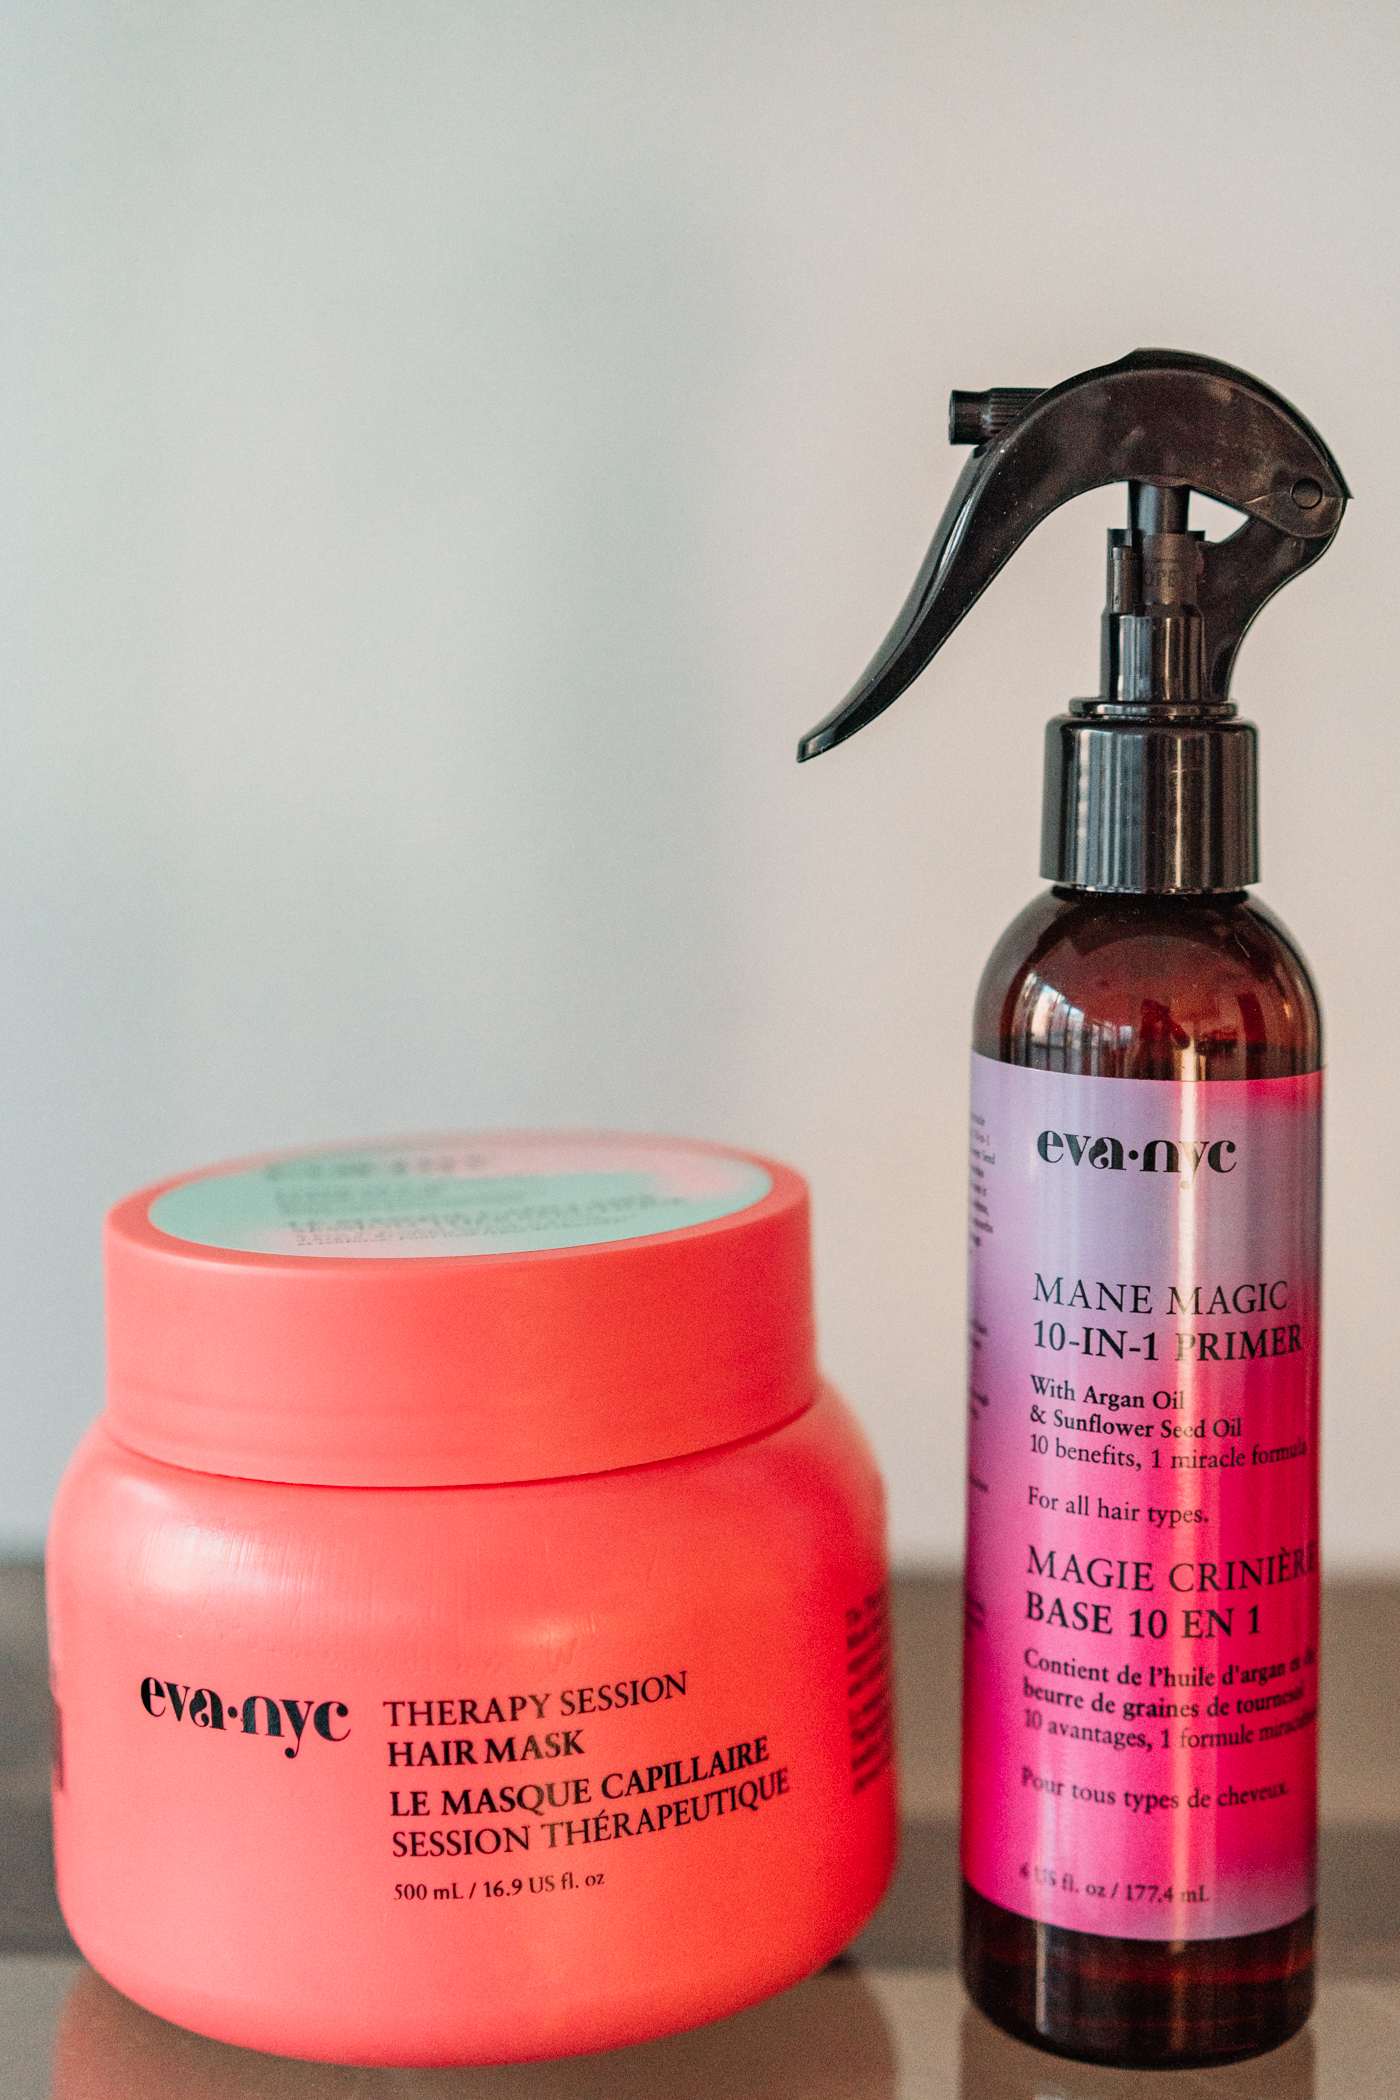 herapy session hair mask and mane magic 10-in-1 primer